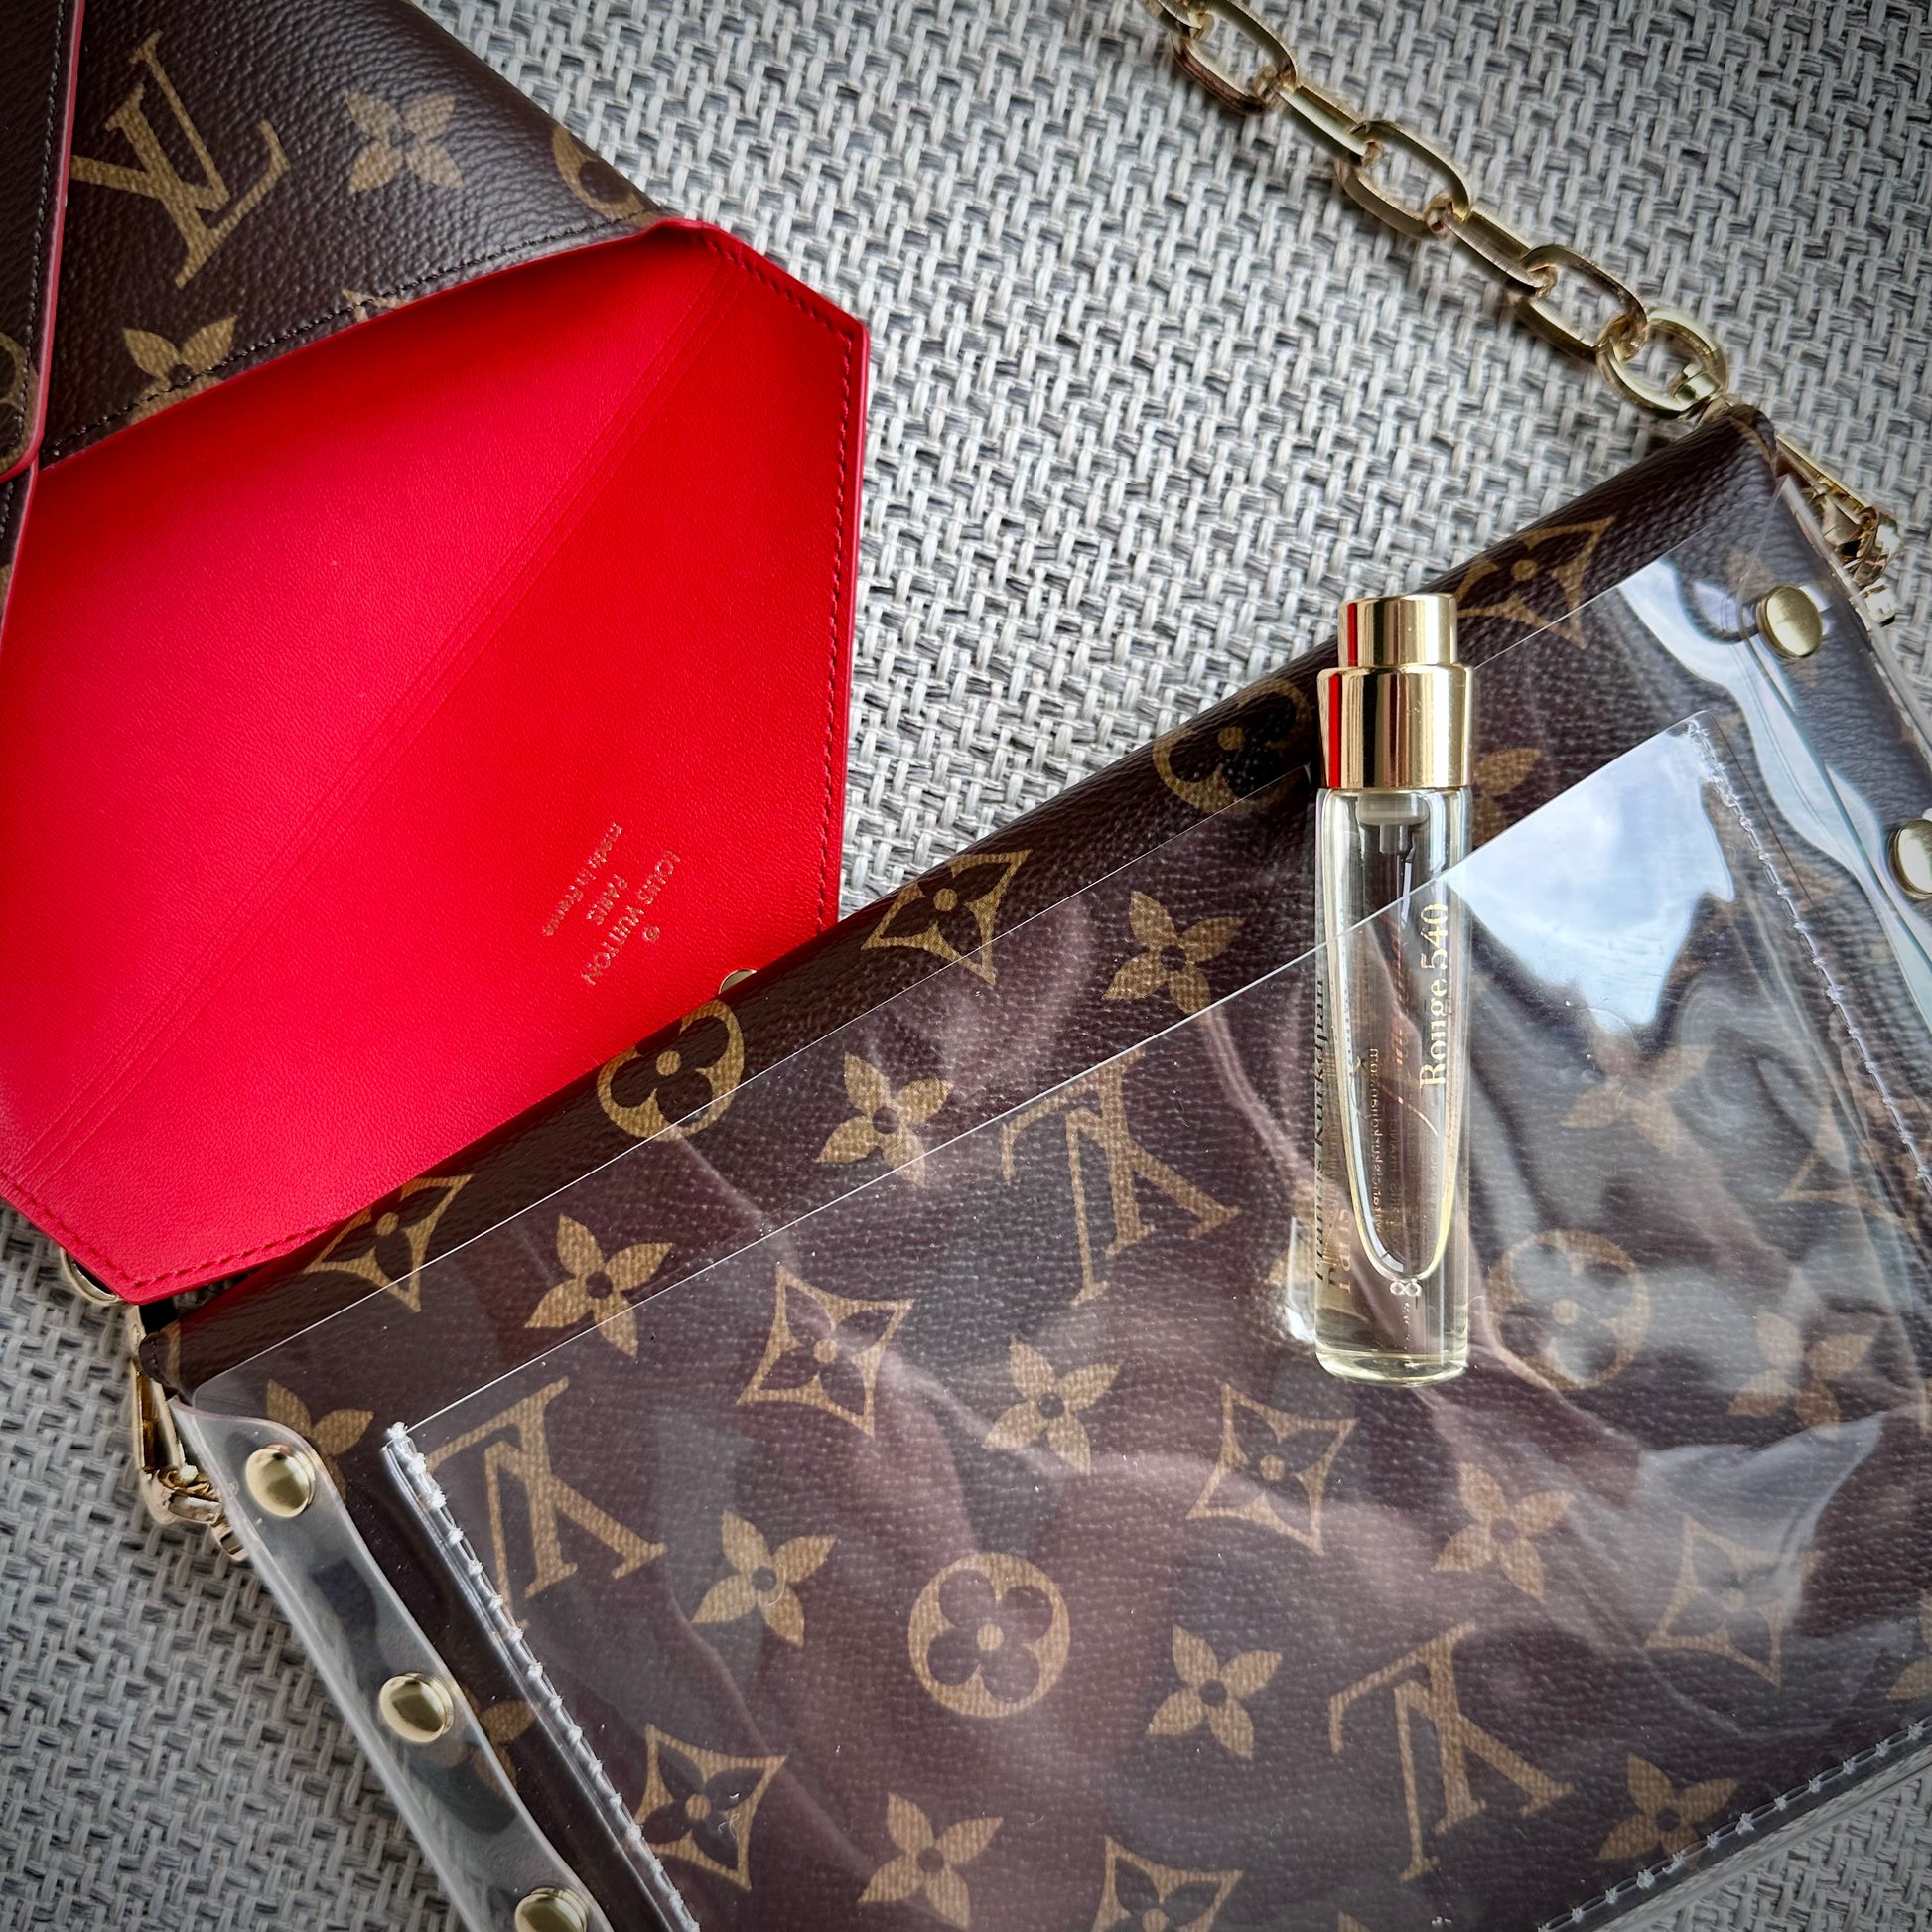 Convert the LV Toiletry Pouch into a Bag!